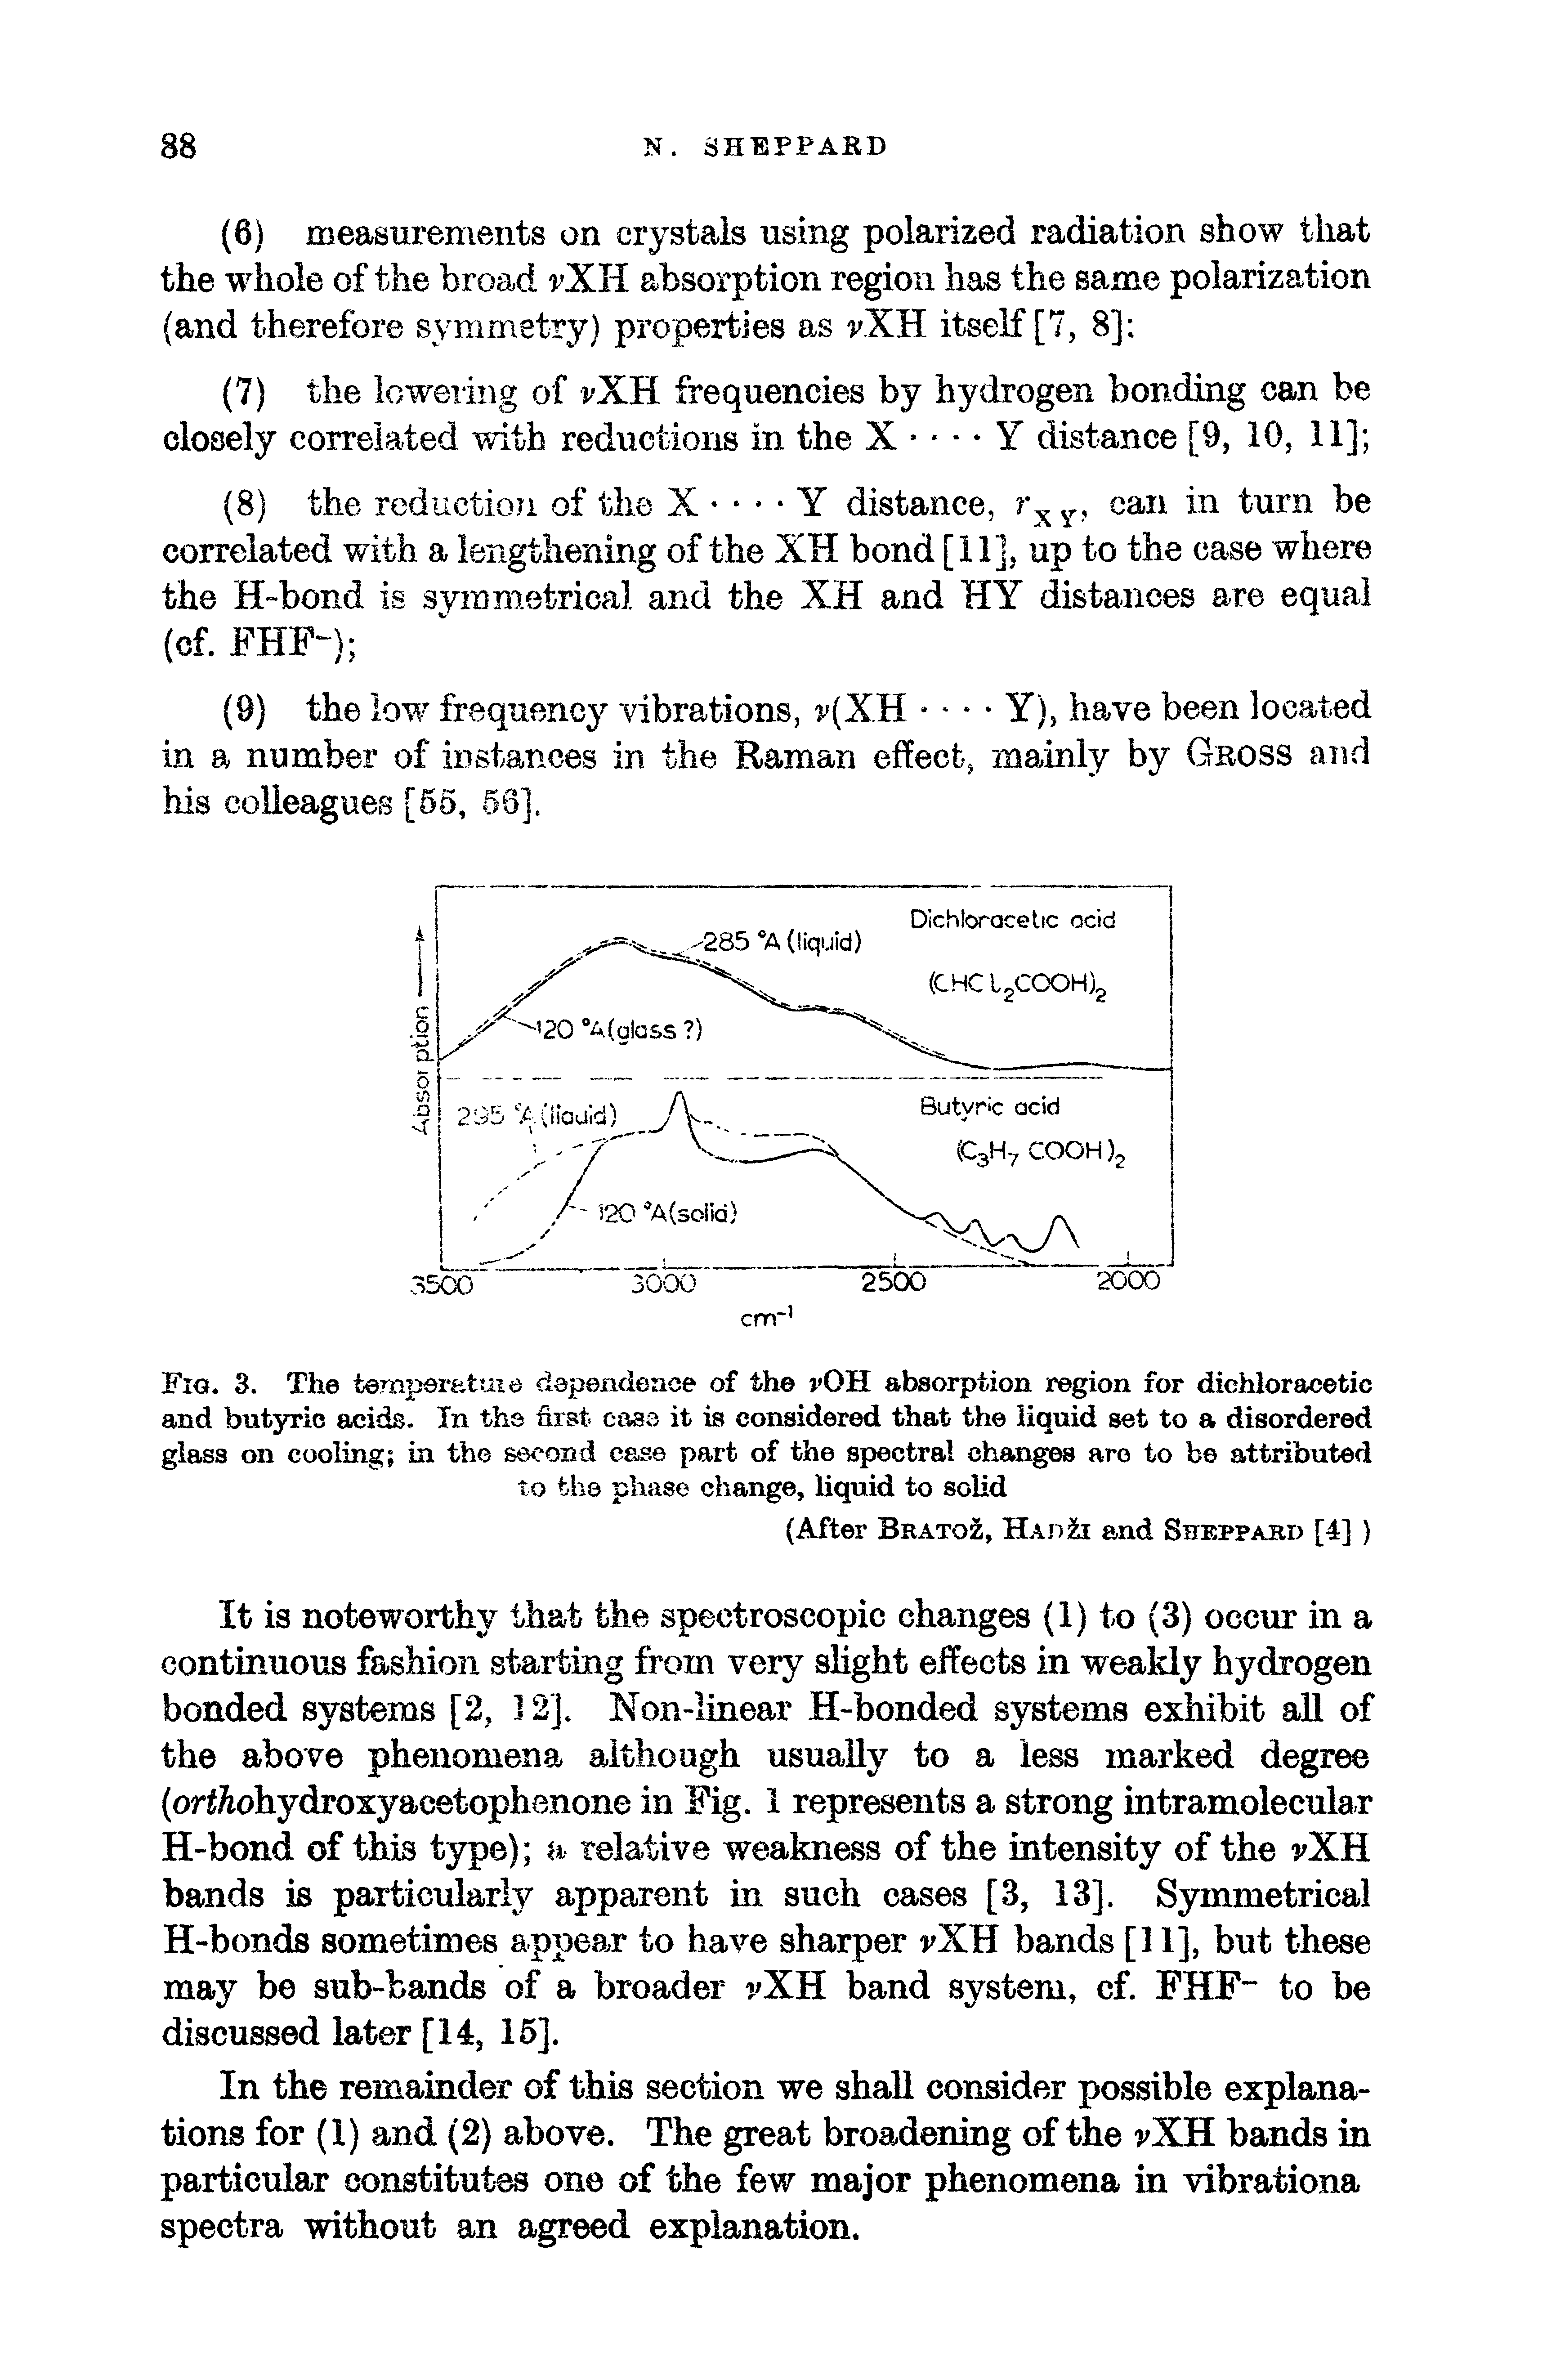 Fig. 3. The temperatuia dependence of the OH absorption region for dichloracetic and butyric acids. In the hist case it is considered that the liquid set to a disordered glass on cooling in the second case part of the spectral changes are to be attributed t o the phase change, liquid to solid...